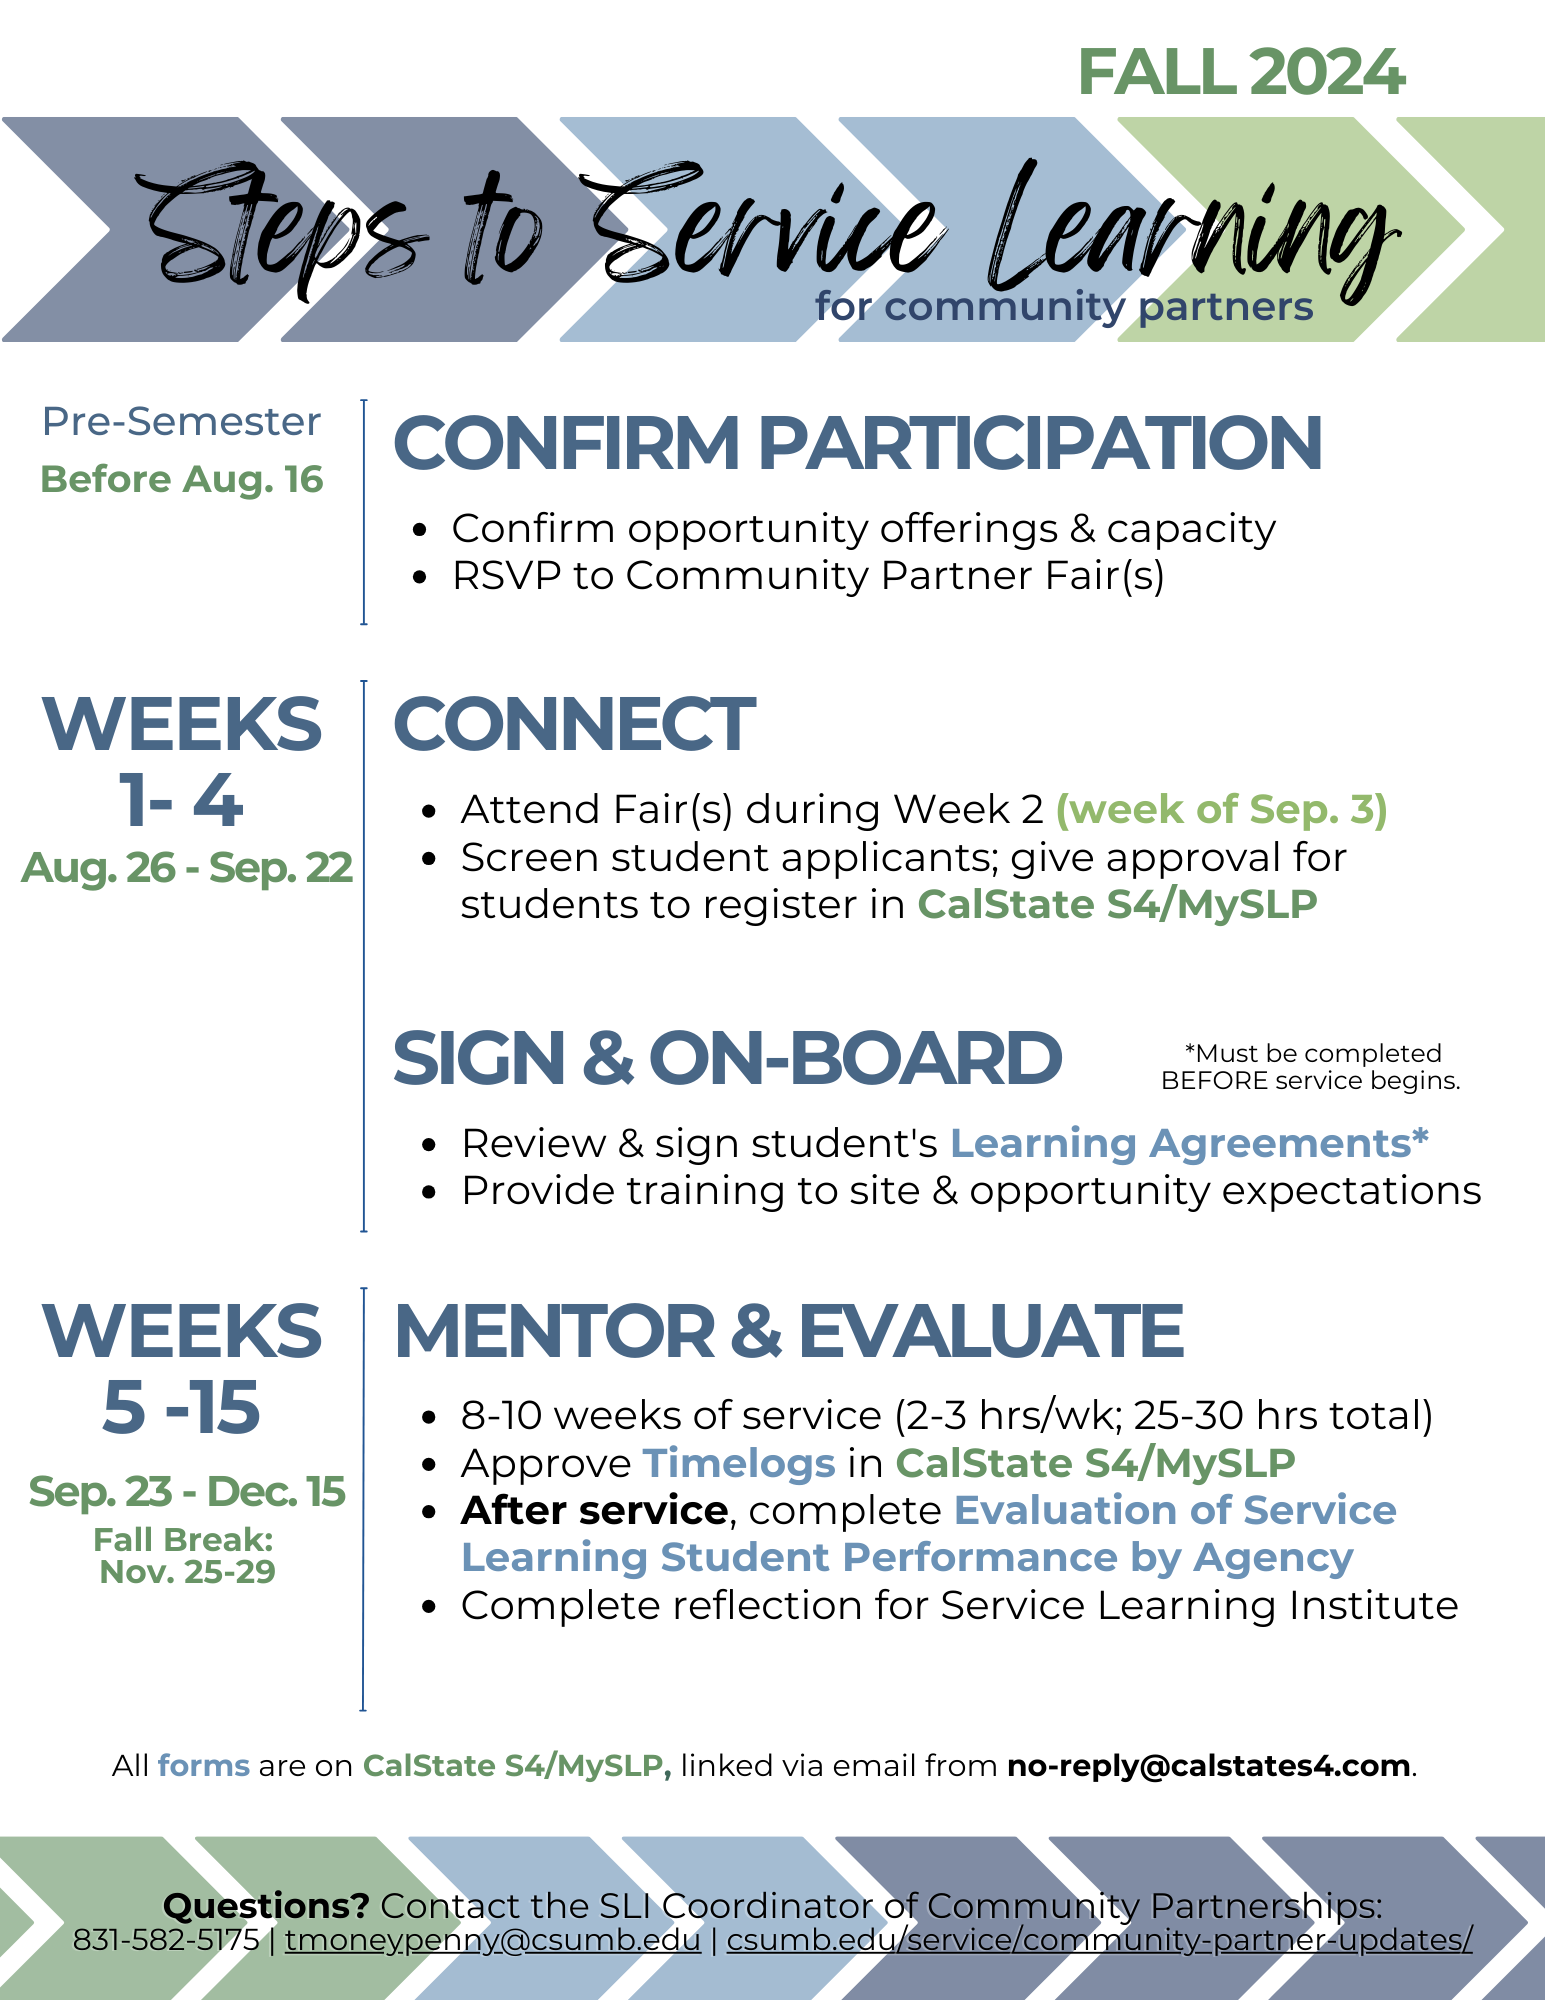 Steps to Service Learning